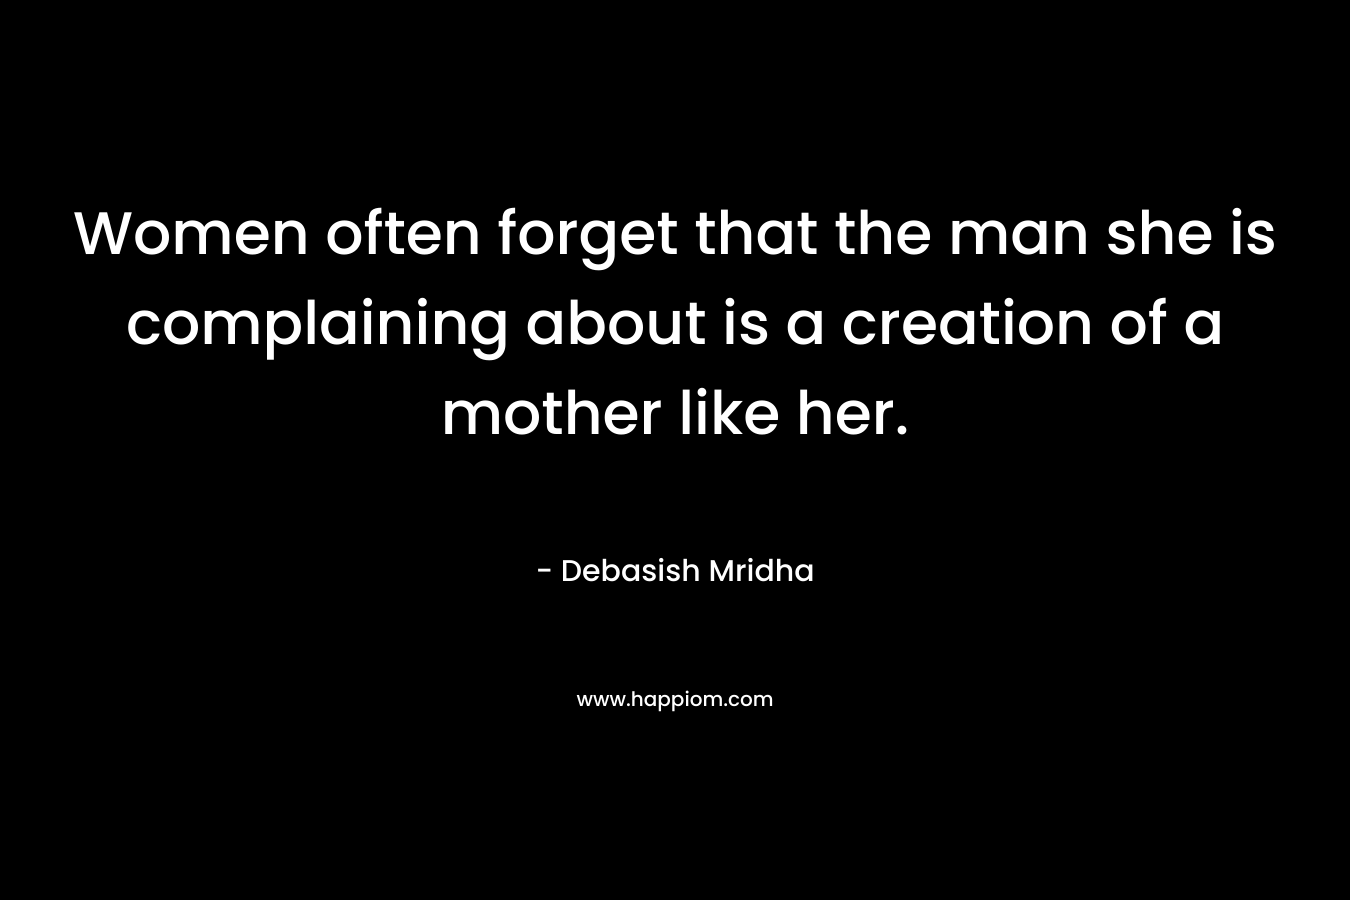 Women often forget that the man she is complaining about is a creation of a mother like her.